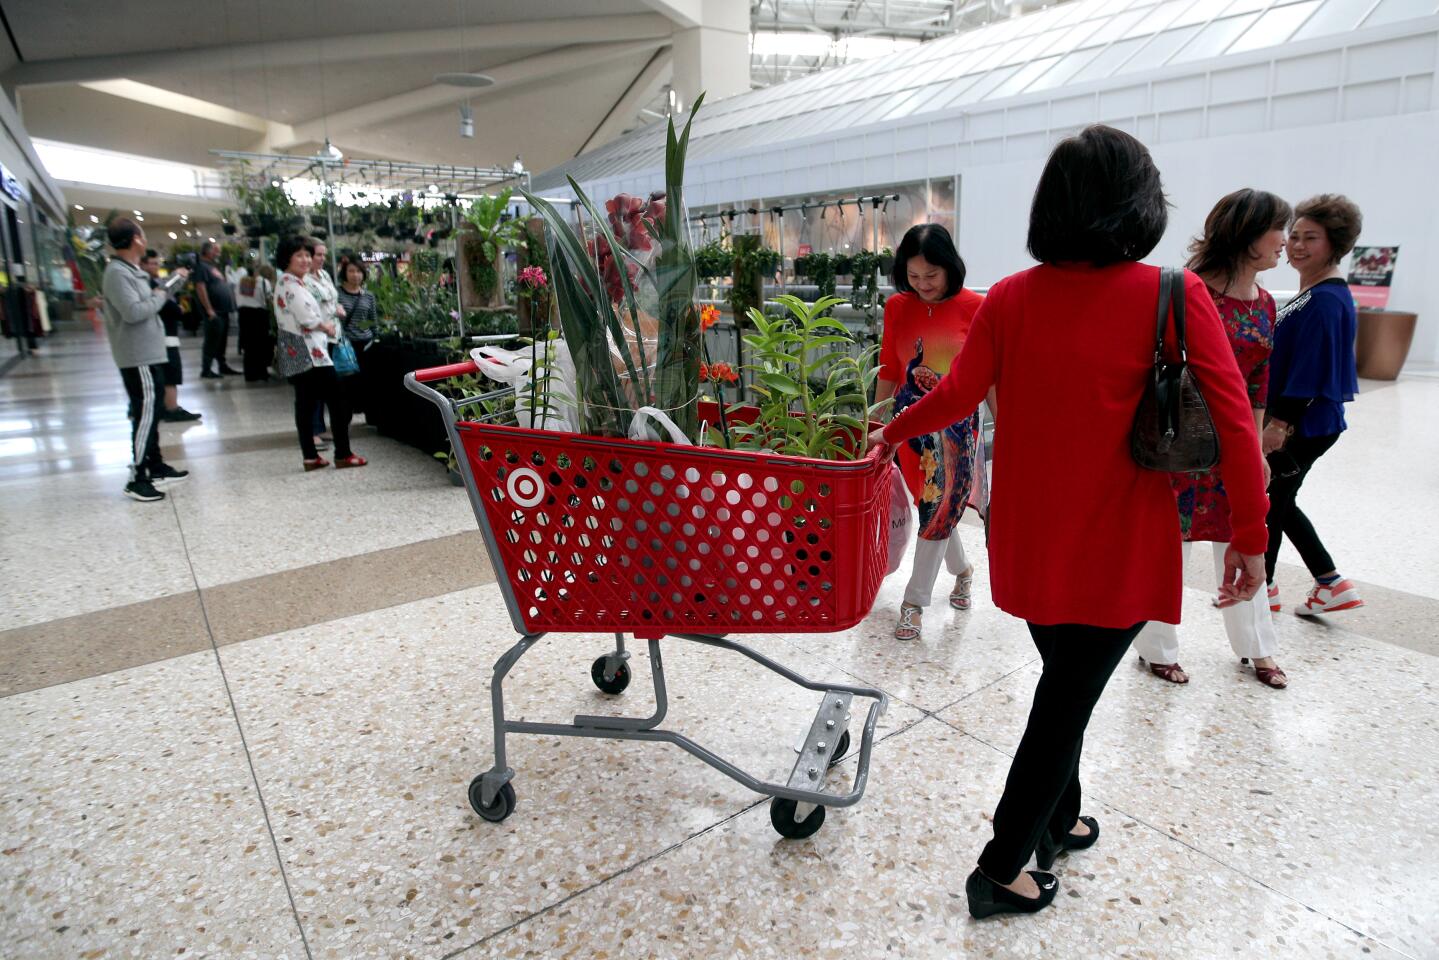 Shoppers haul their purchase of orchids in a shopping cart at the Newport Harbor Orchid Society Orchid Expo and Sale 2020, at the Westminster Mall on Friday, Feb. 7, 2020. The event runs through Sunday.